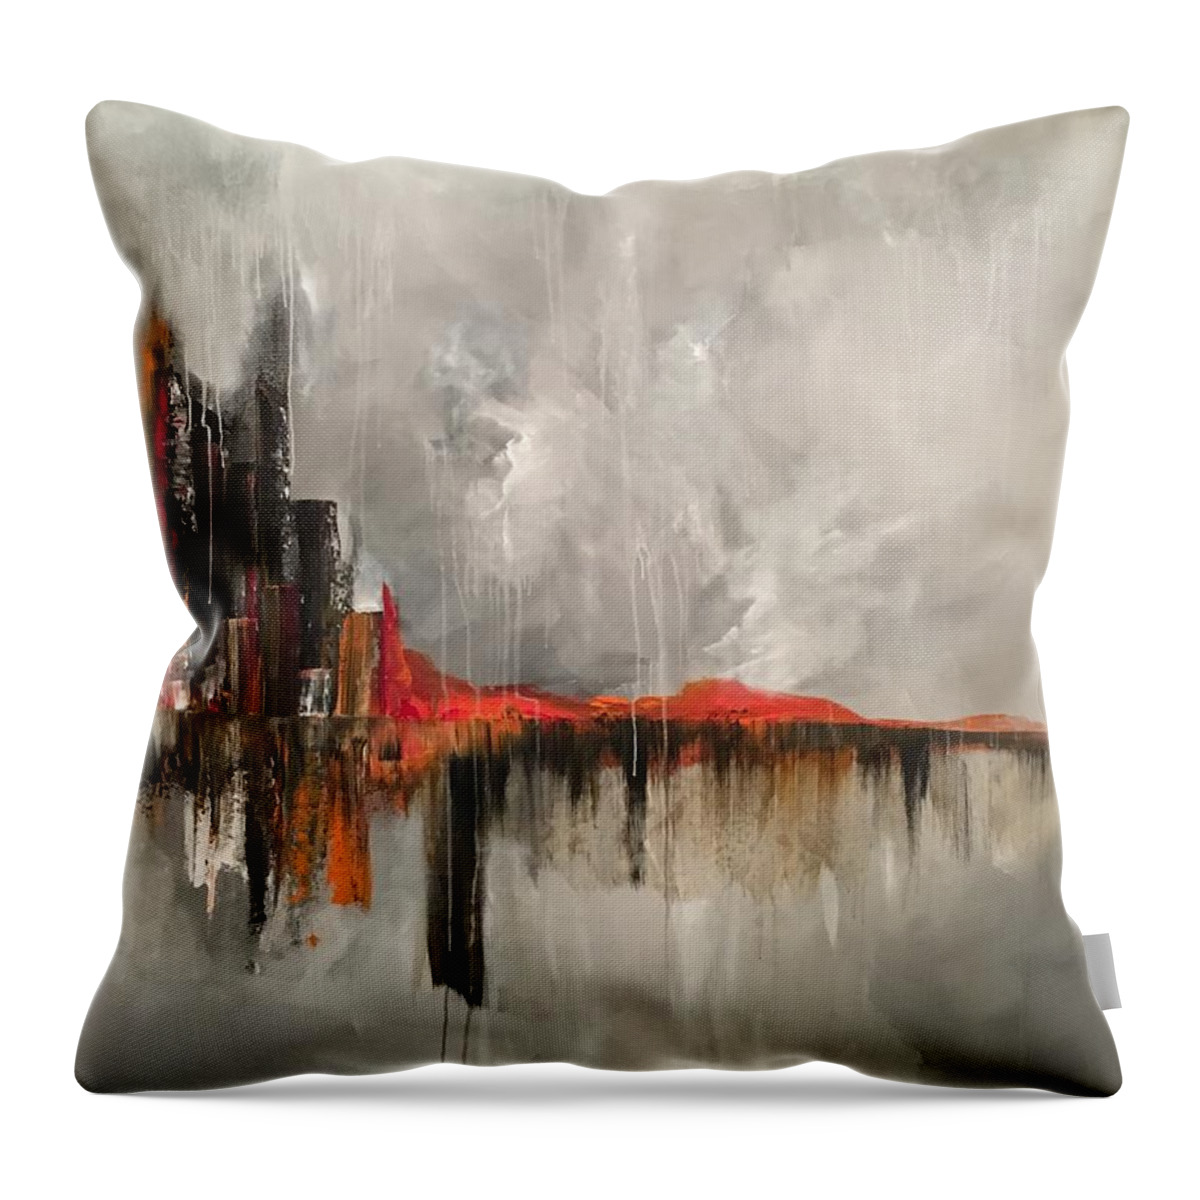 Abstract Throw Pillow featuring the painting Prodigious by Soraya Silvestri